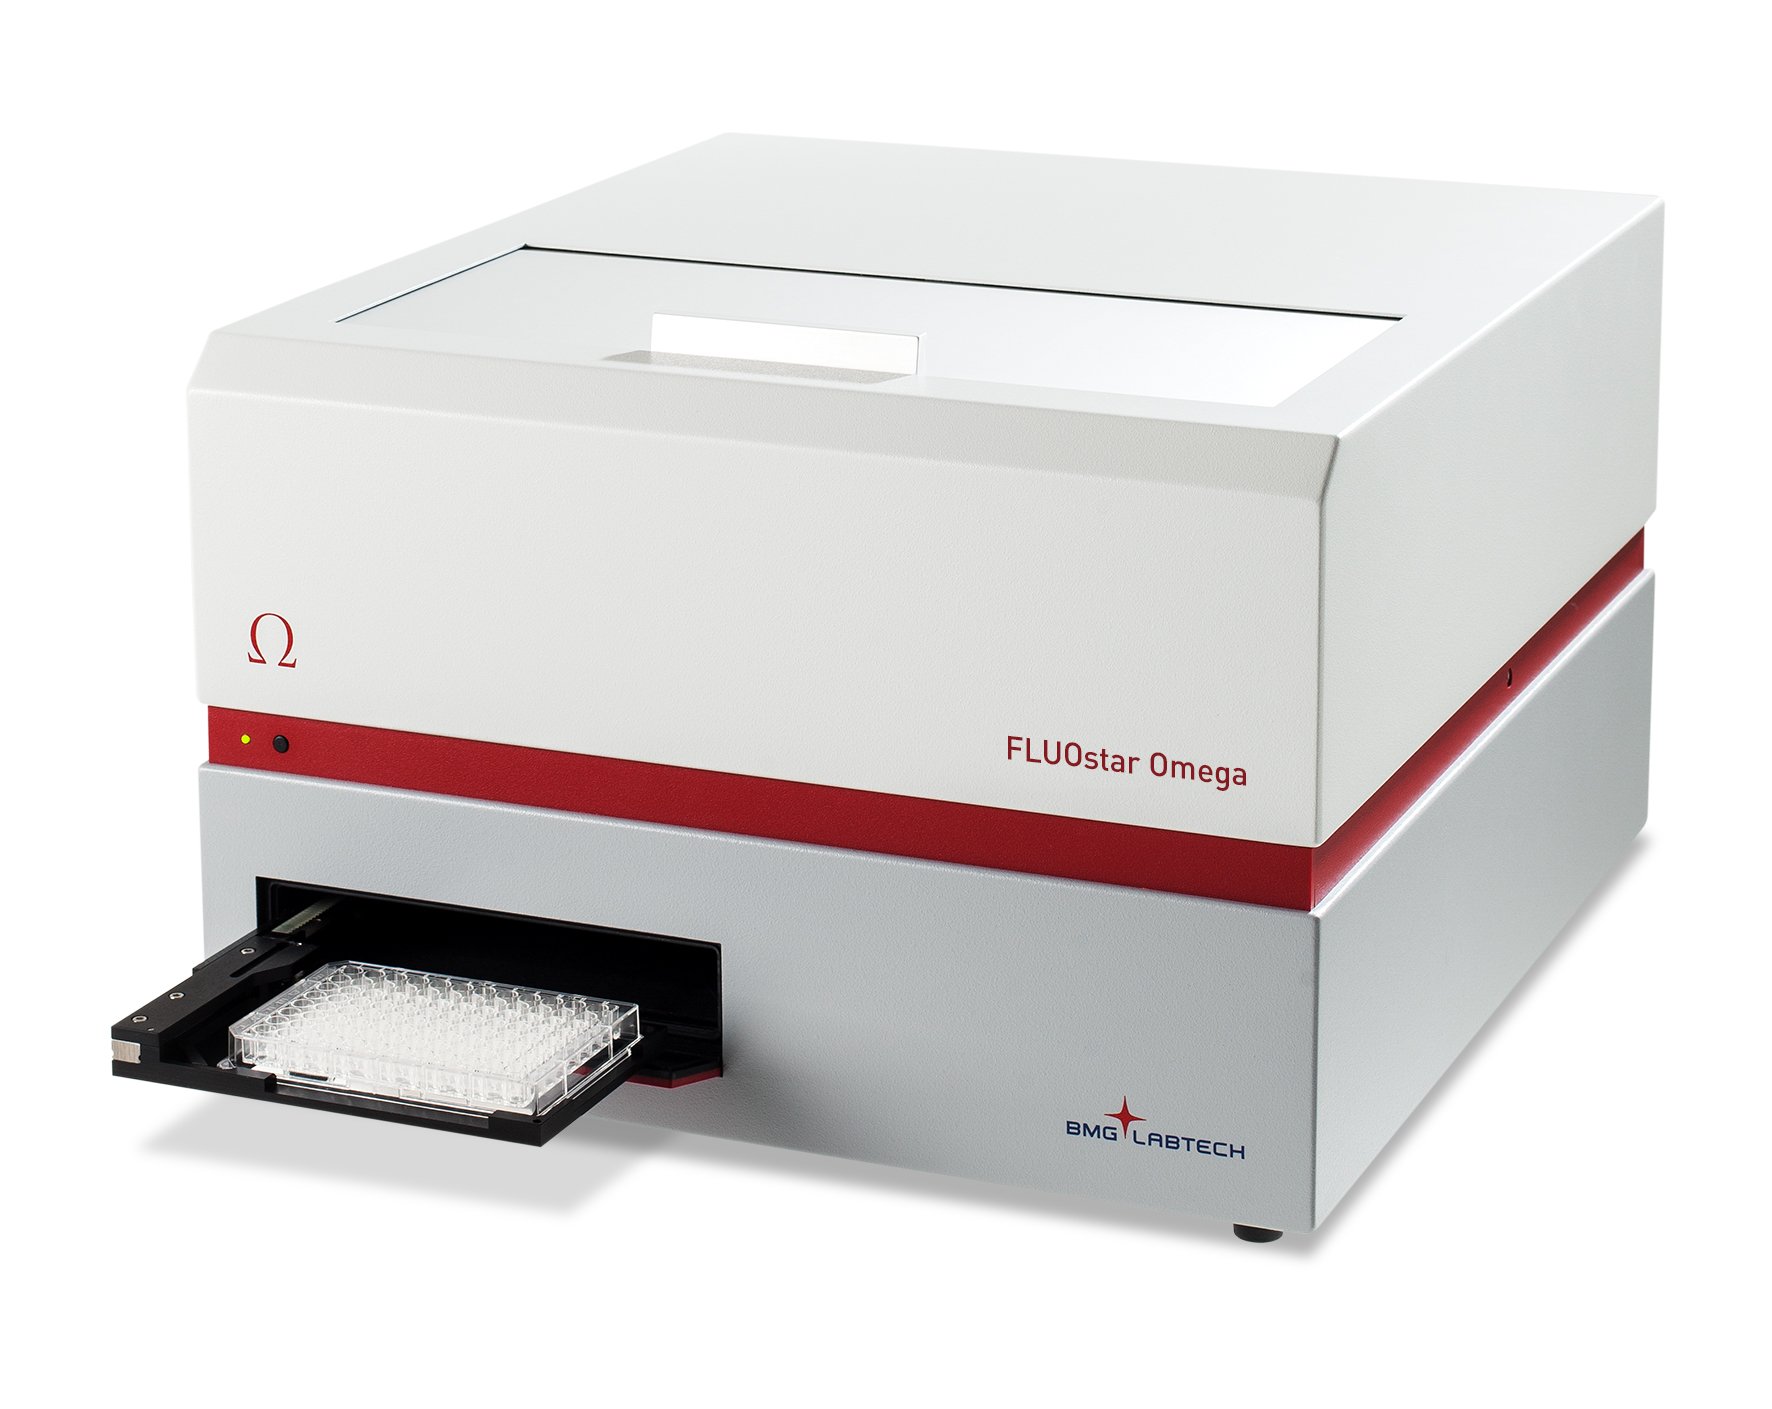 Image: The FLUOstar Omega plate reader (Photo courtesy of BMG LABTECH).